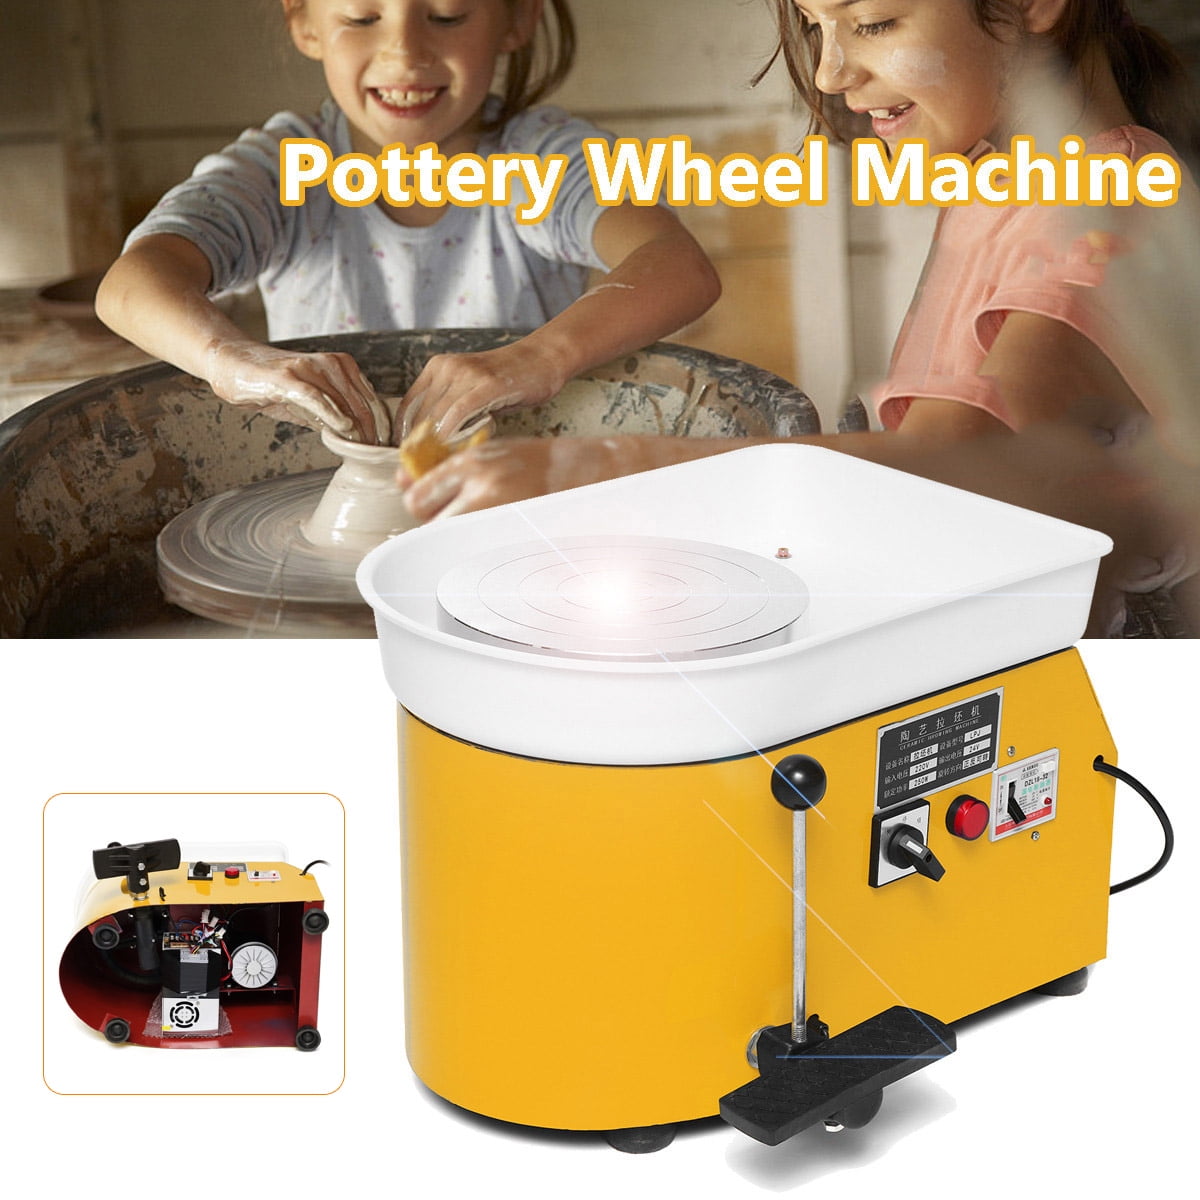 Gray 250w Pottery Wheel Ceramic Machine Forming Machine 25CM Electric Pottery Wheel with Foot Pedal DIY for Ceramic Work Clay Art Craft Adults Kids